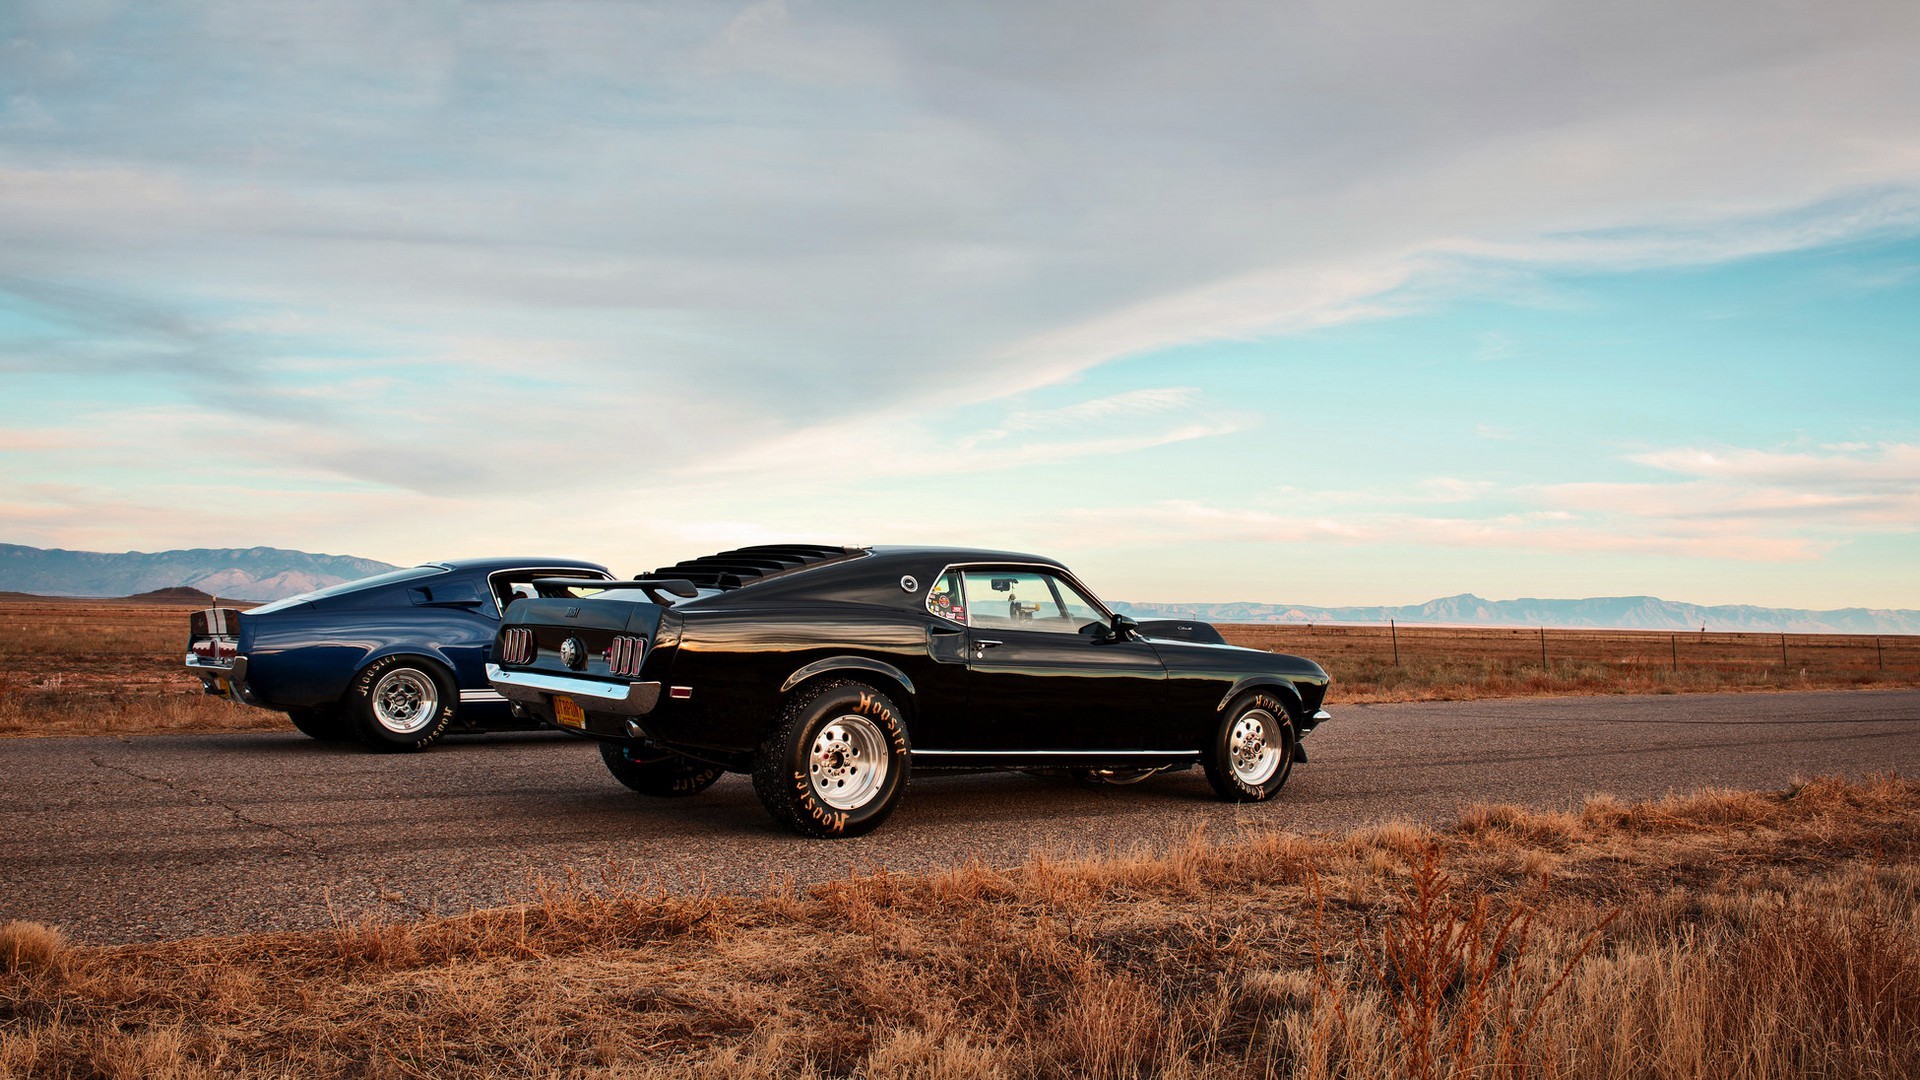 General 1920x1080 Ford Mustang Ford Mustang Shelby car Ford Shelby blue cars black cars sky outdoors landscape road asphalt vehicle muscle cars American cars